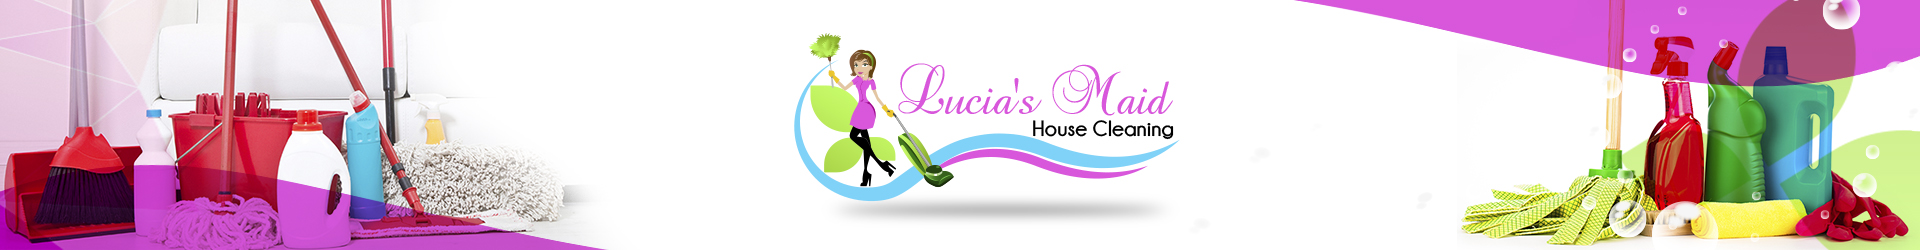 Lucias Maid House Cleaning Services - top header